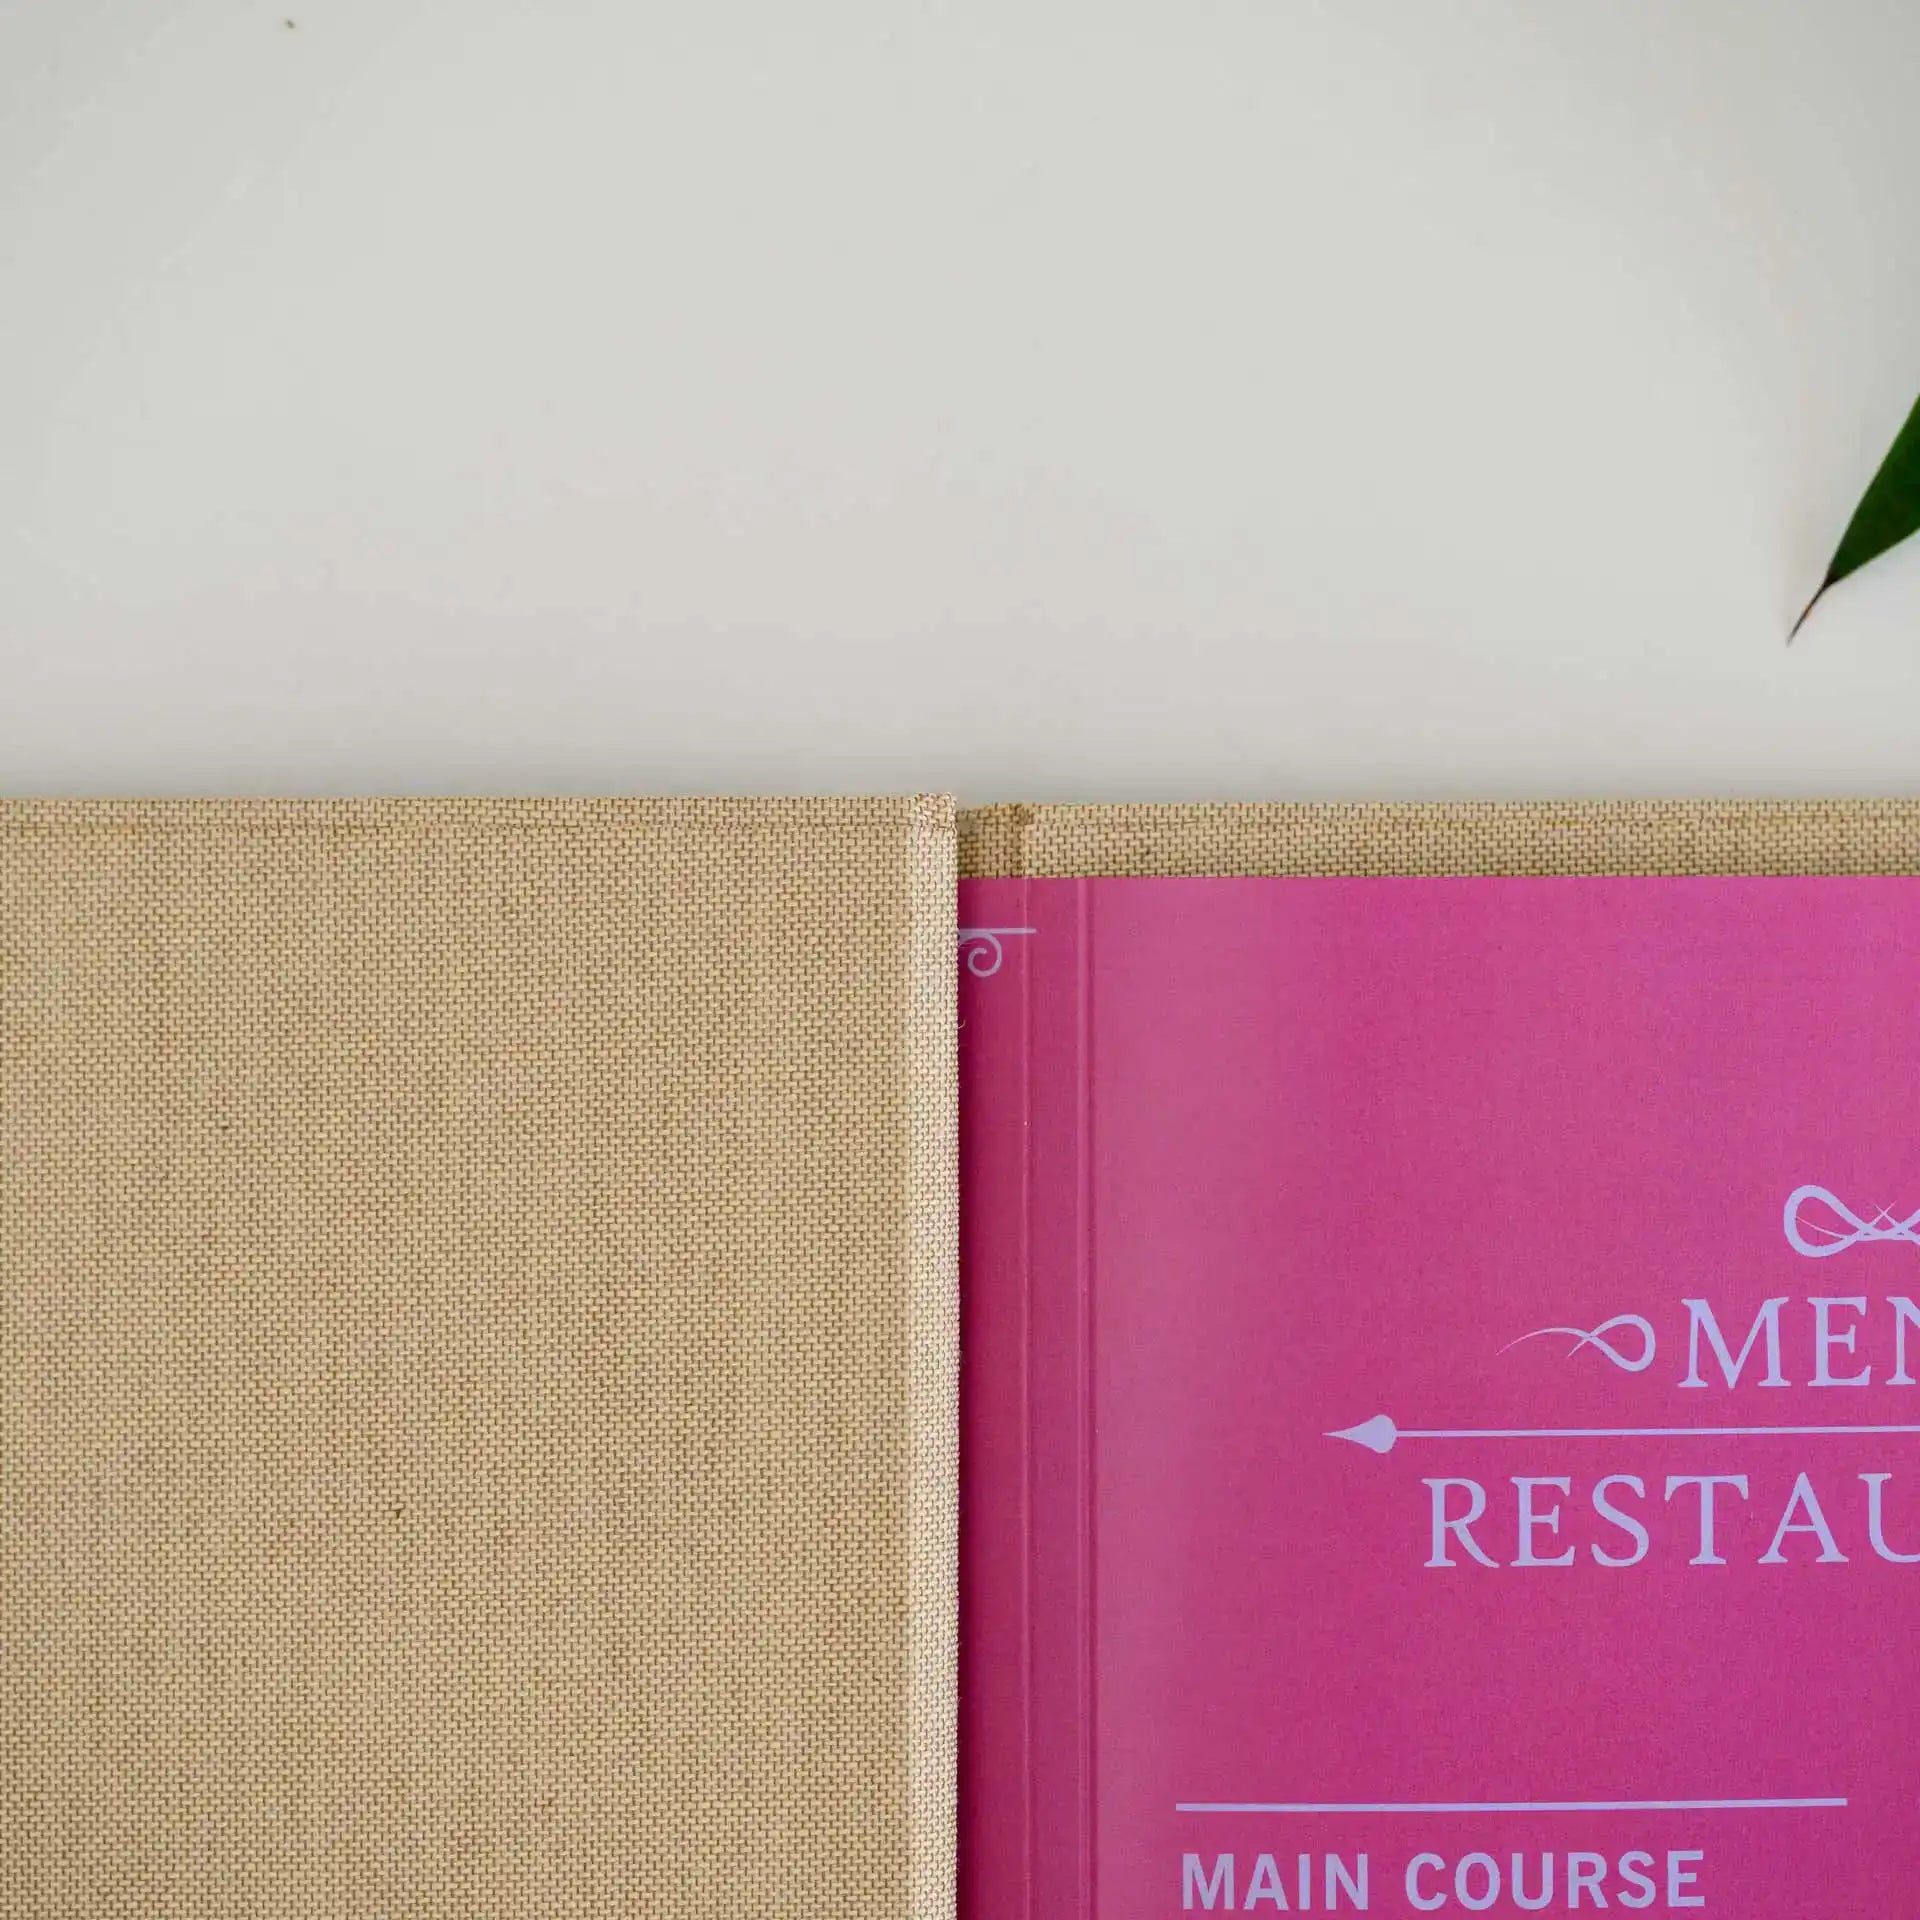 Personalized A4 Menu Holder: Add a touch of personality to your menu presentation.